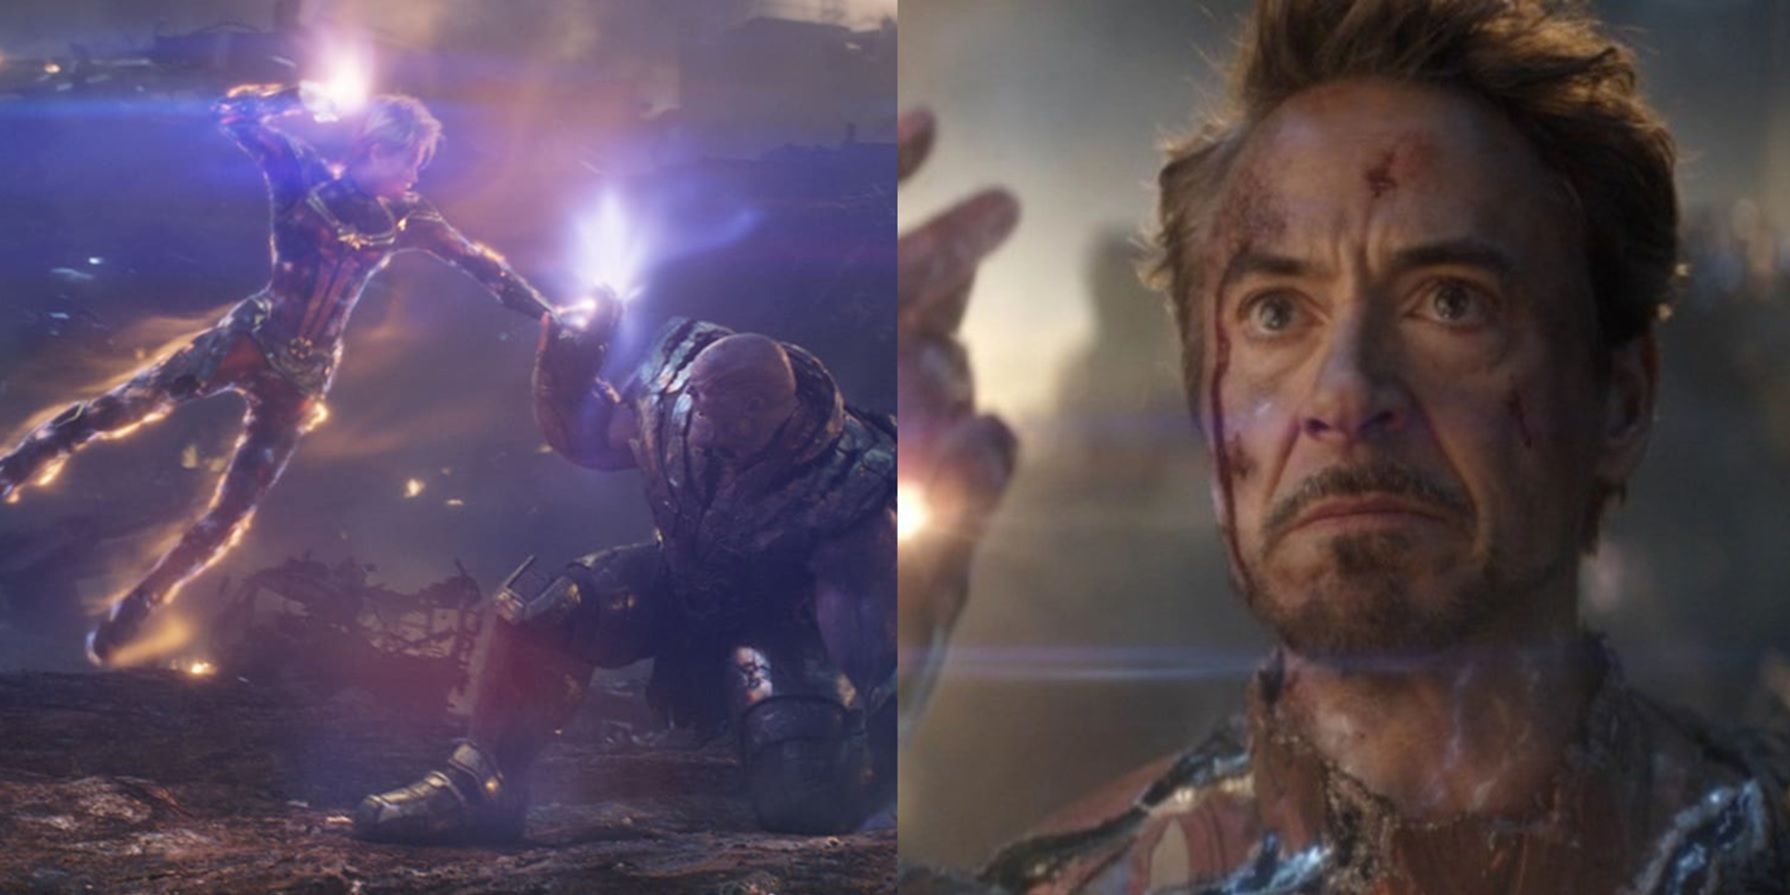 Captain Marvel fighting Thanos and Iron Man snapping his fingers in Avengers: Endgame